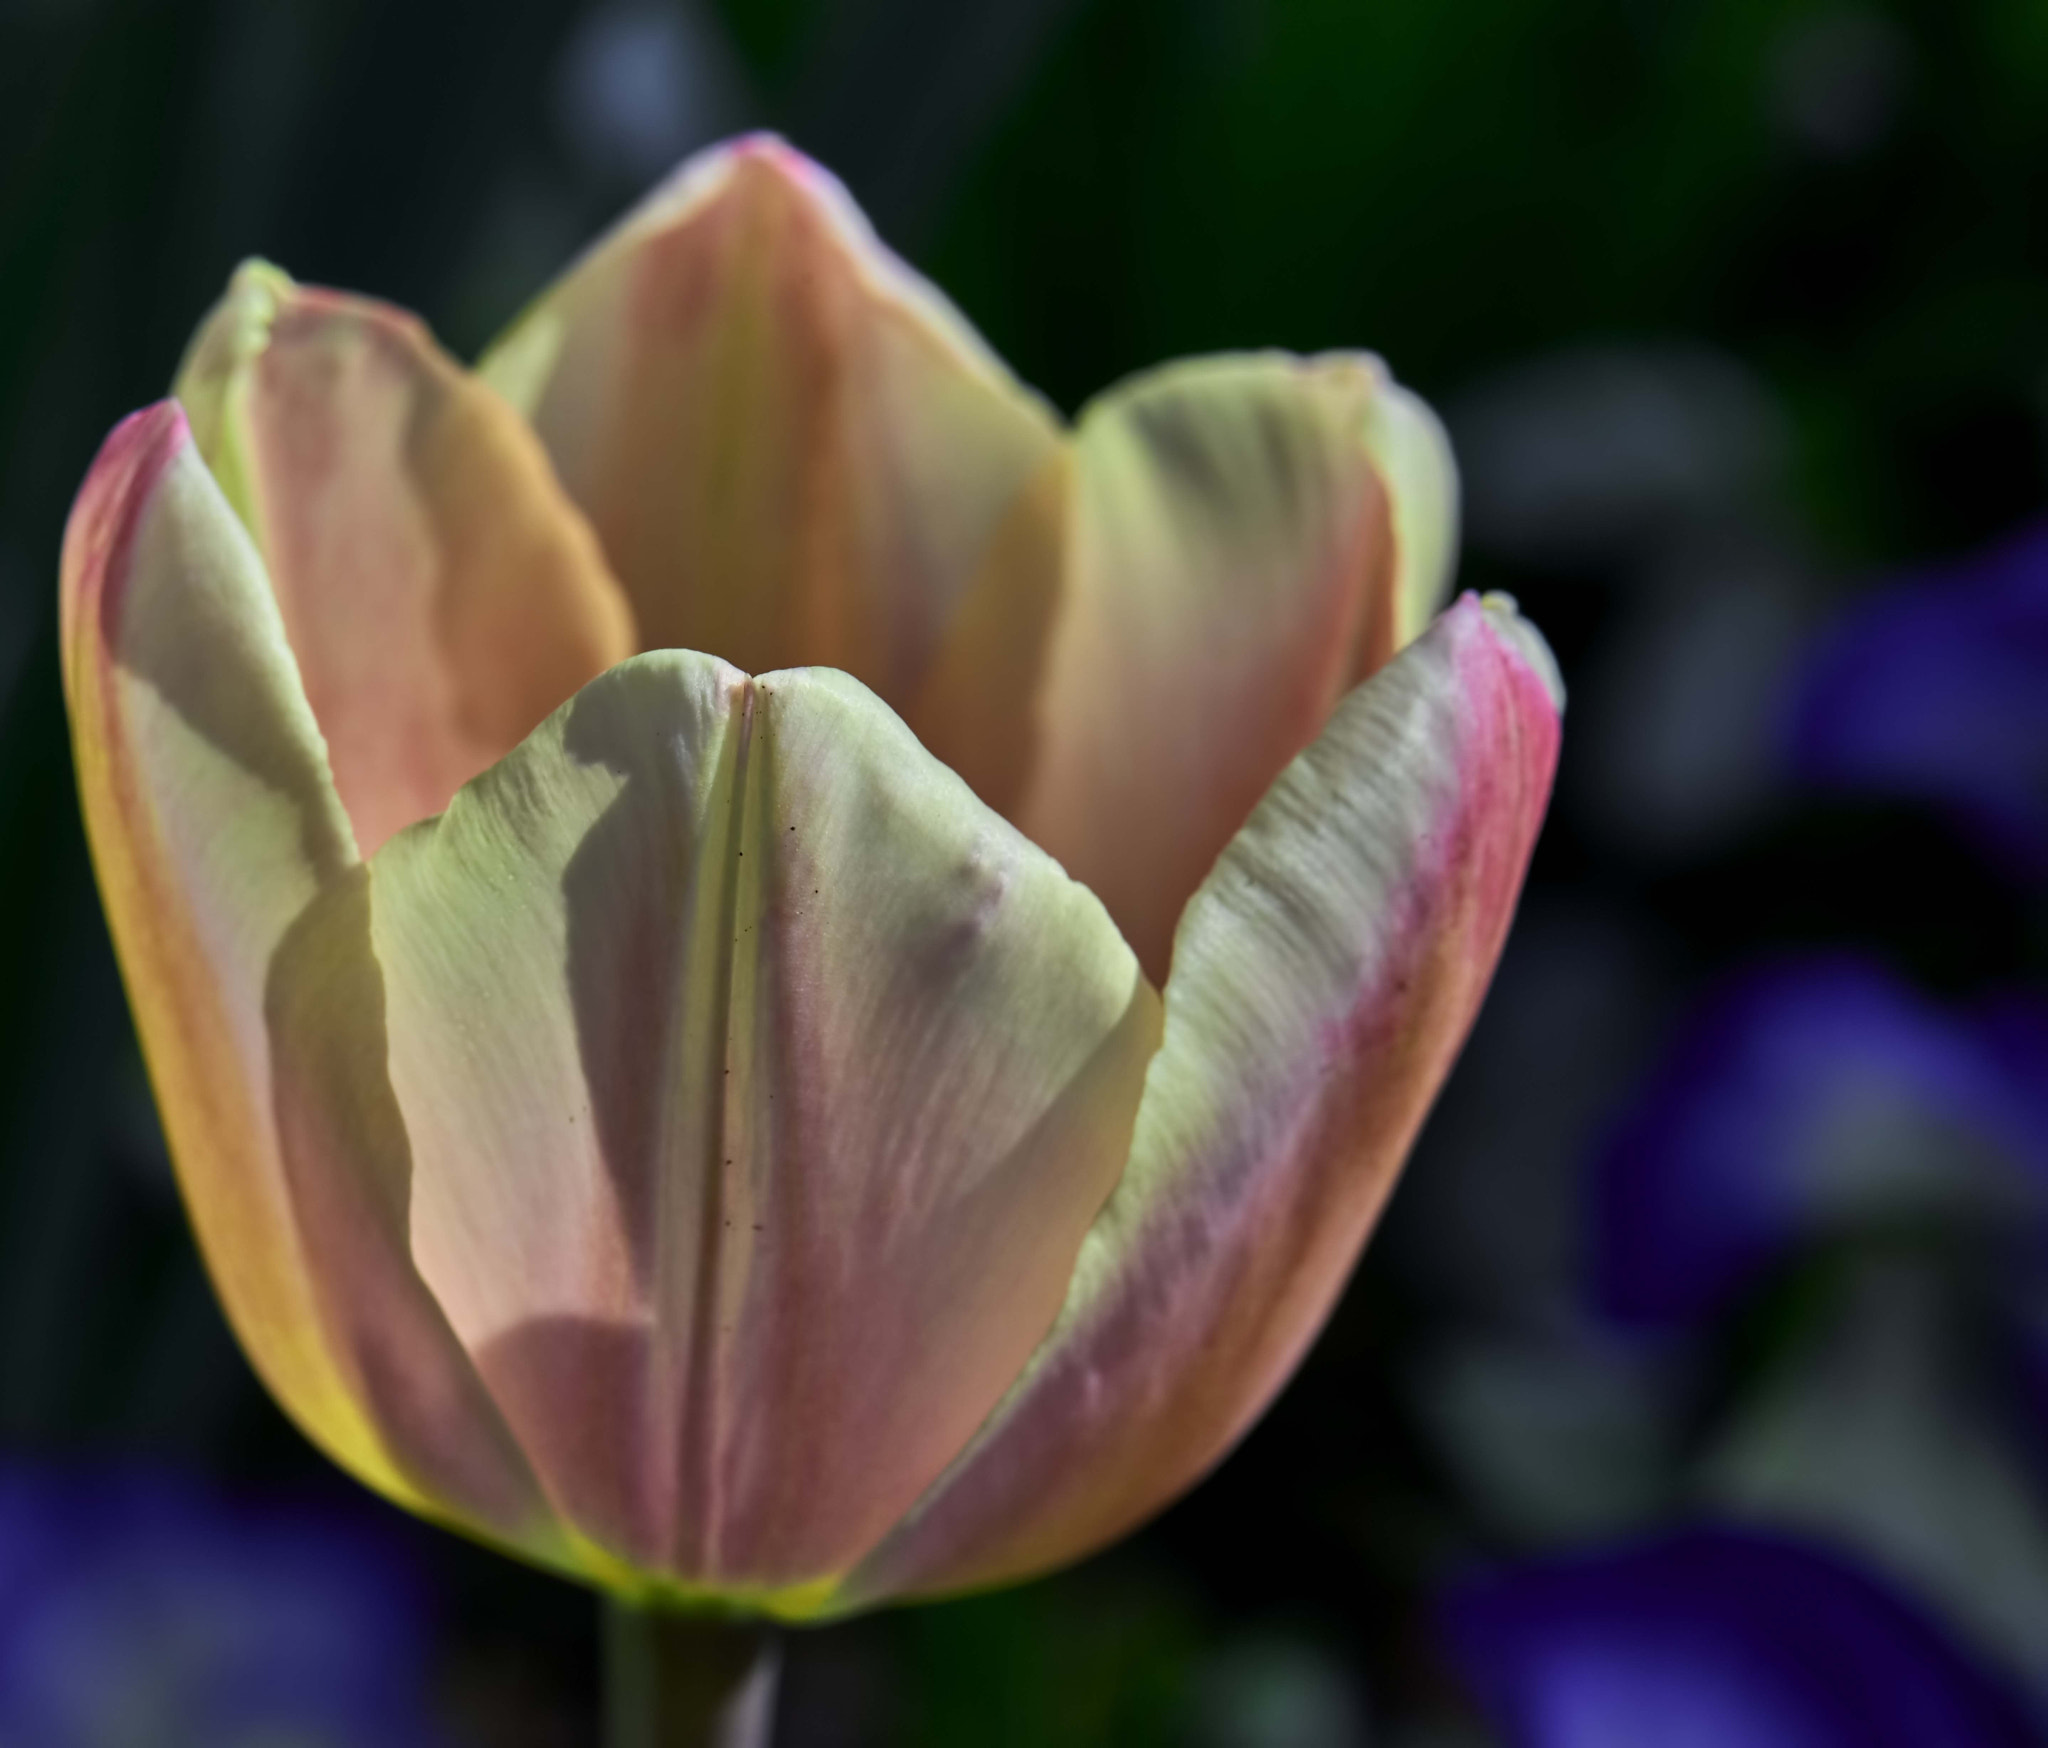 Nikon D800 sample photo. Tulips in bloom at the dallas arboretum photography